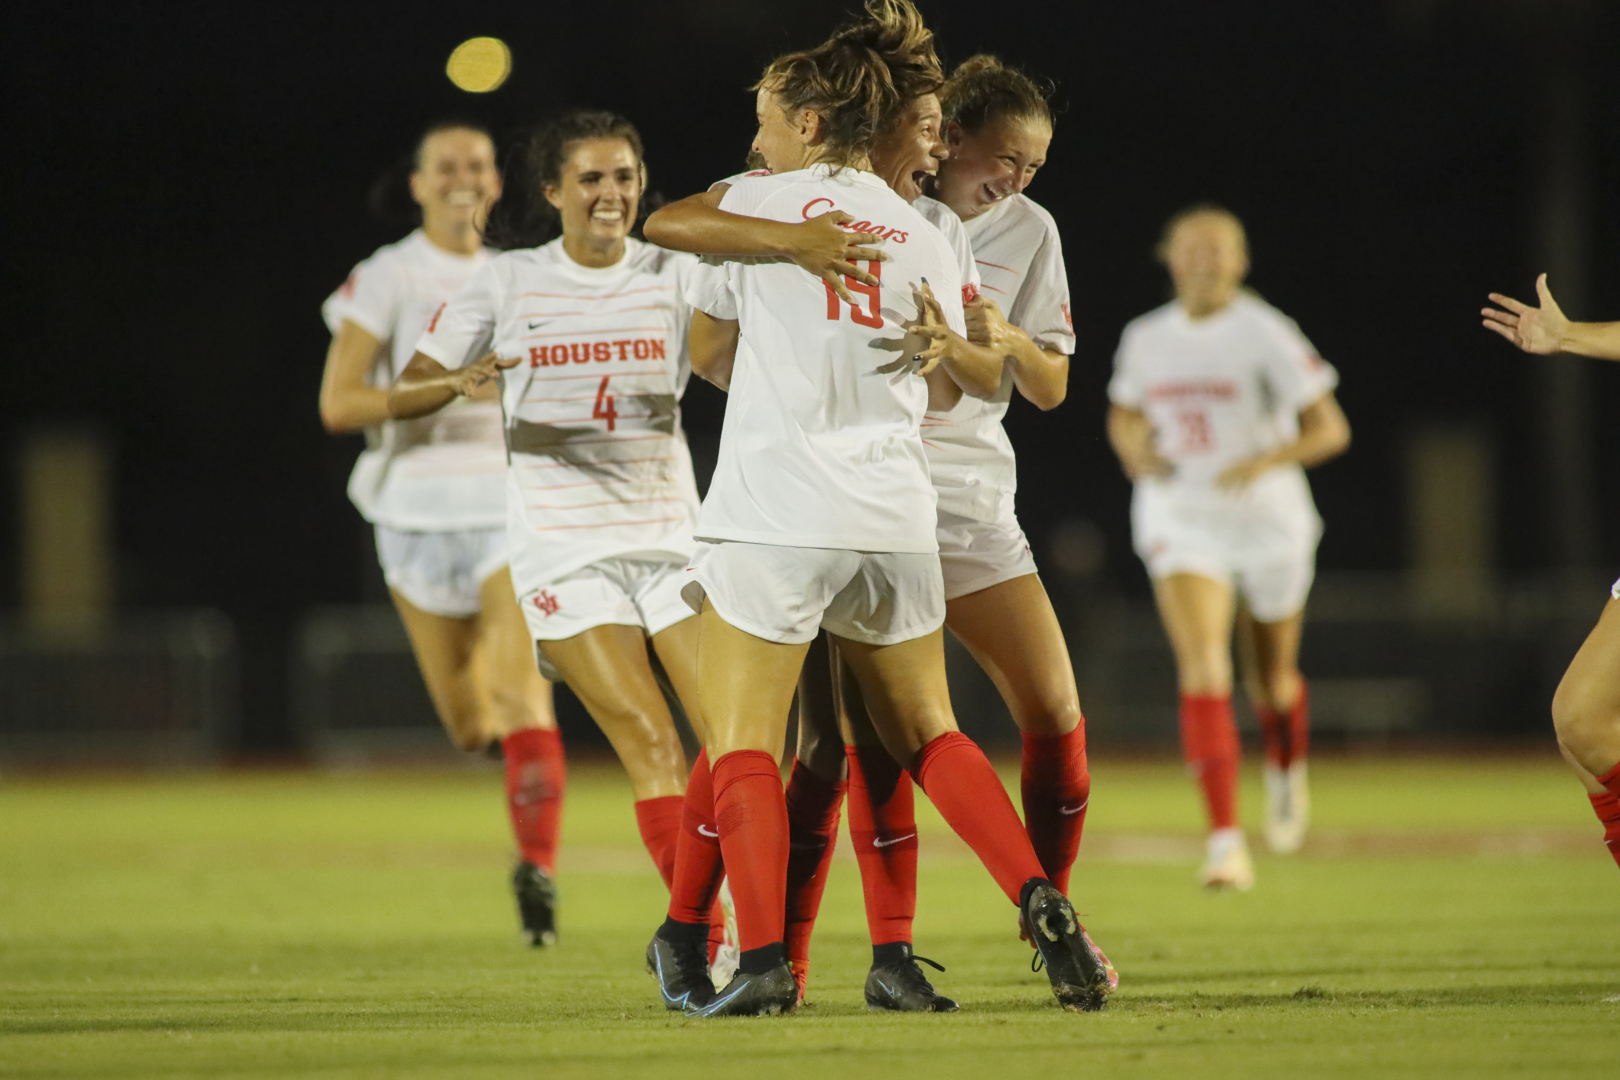 The UH soccer team celebrates a goal during its season opener against Oklahoma.| Courtesy of UH athletics